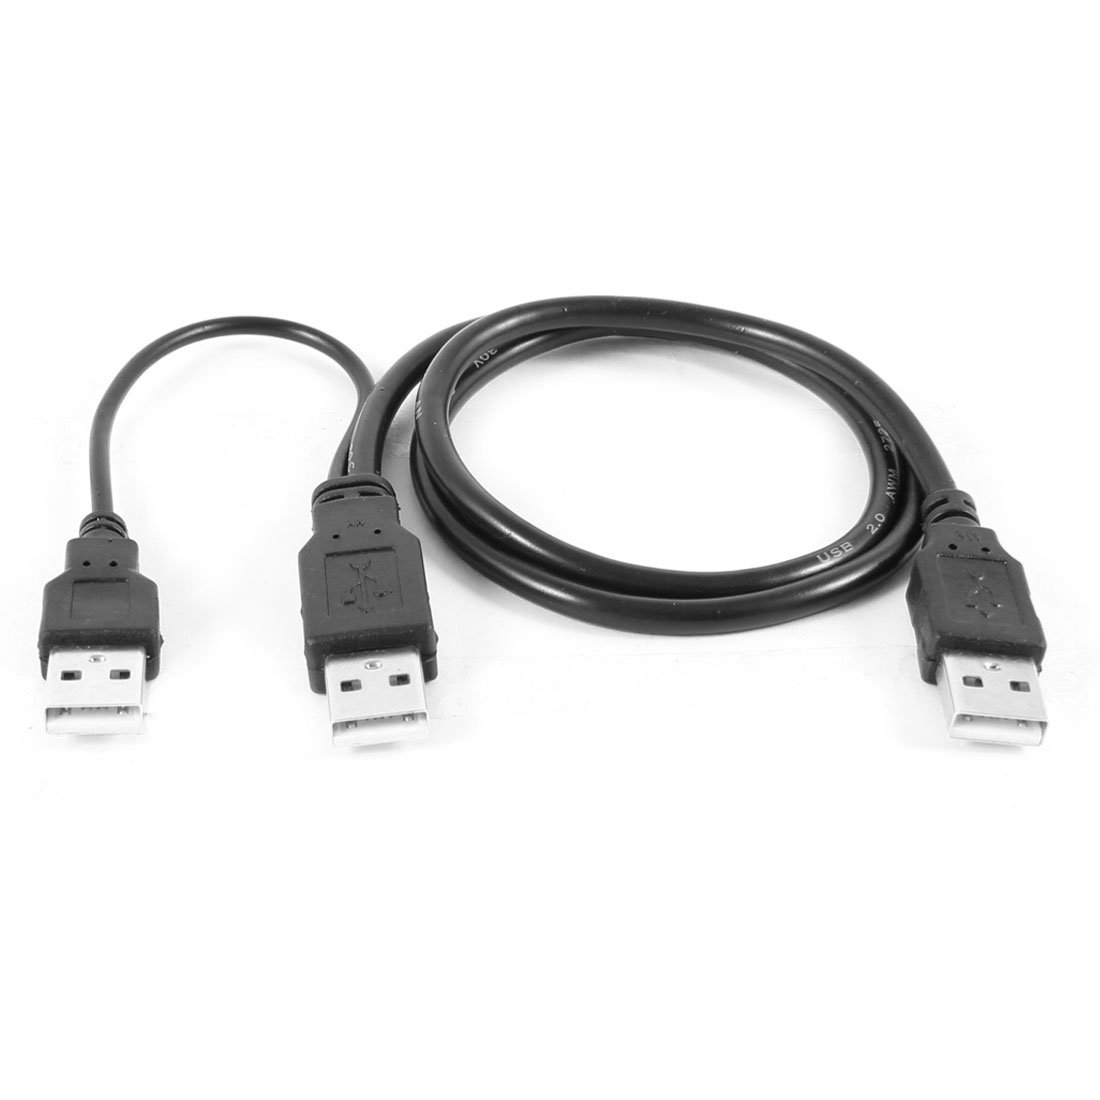 Dual USB A Male Y Splitter Cable Cord 